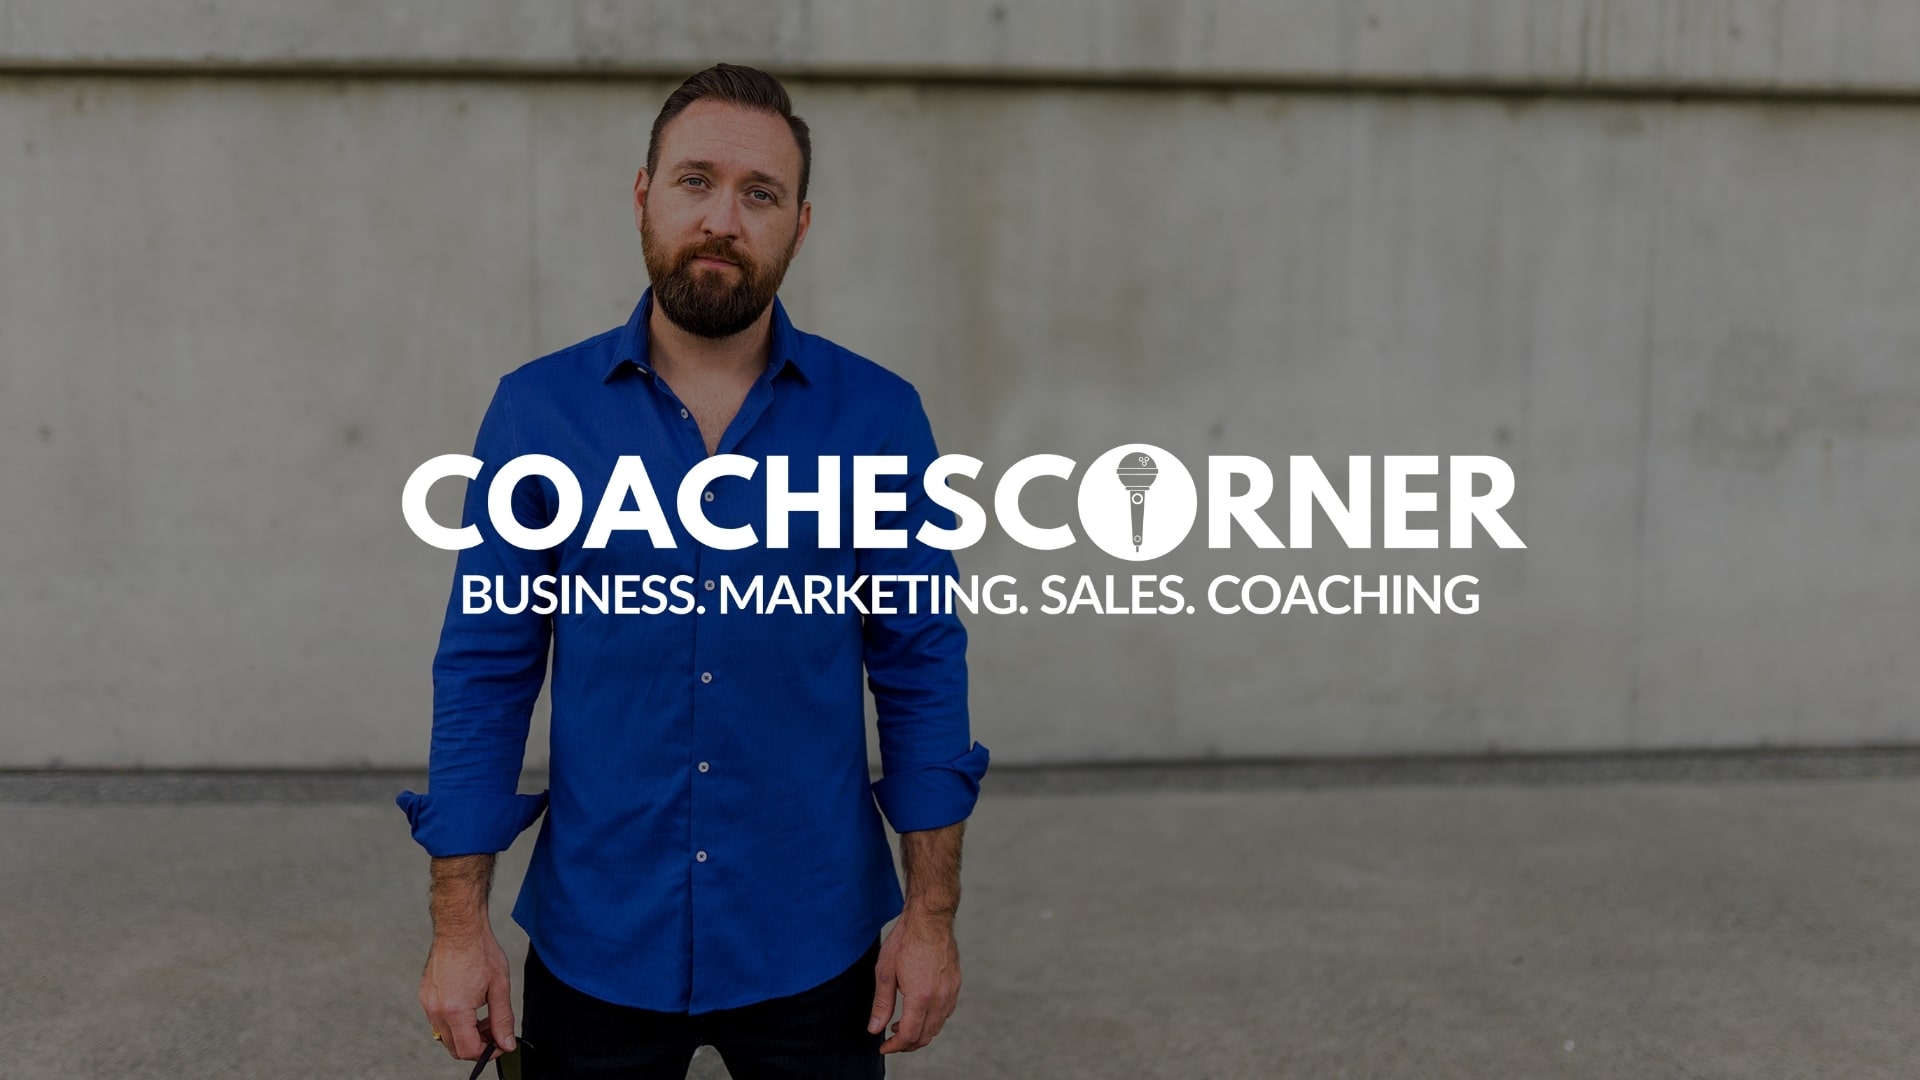 The Coaches Corner Podcast with Lucas Rubix - Build an online coaching business you love 3